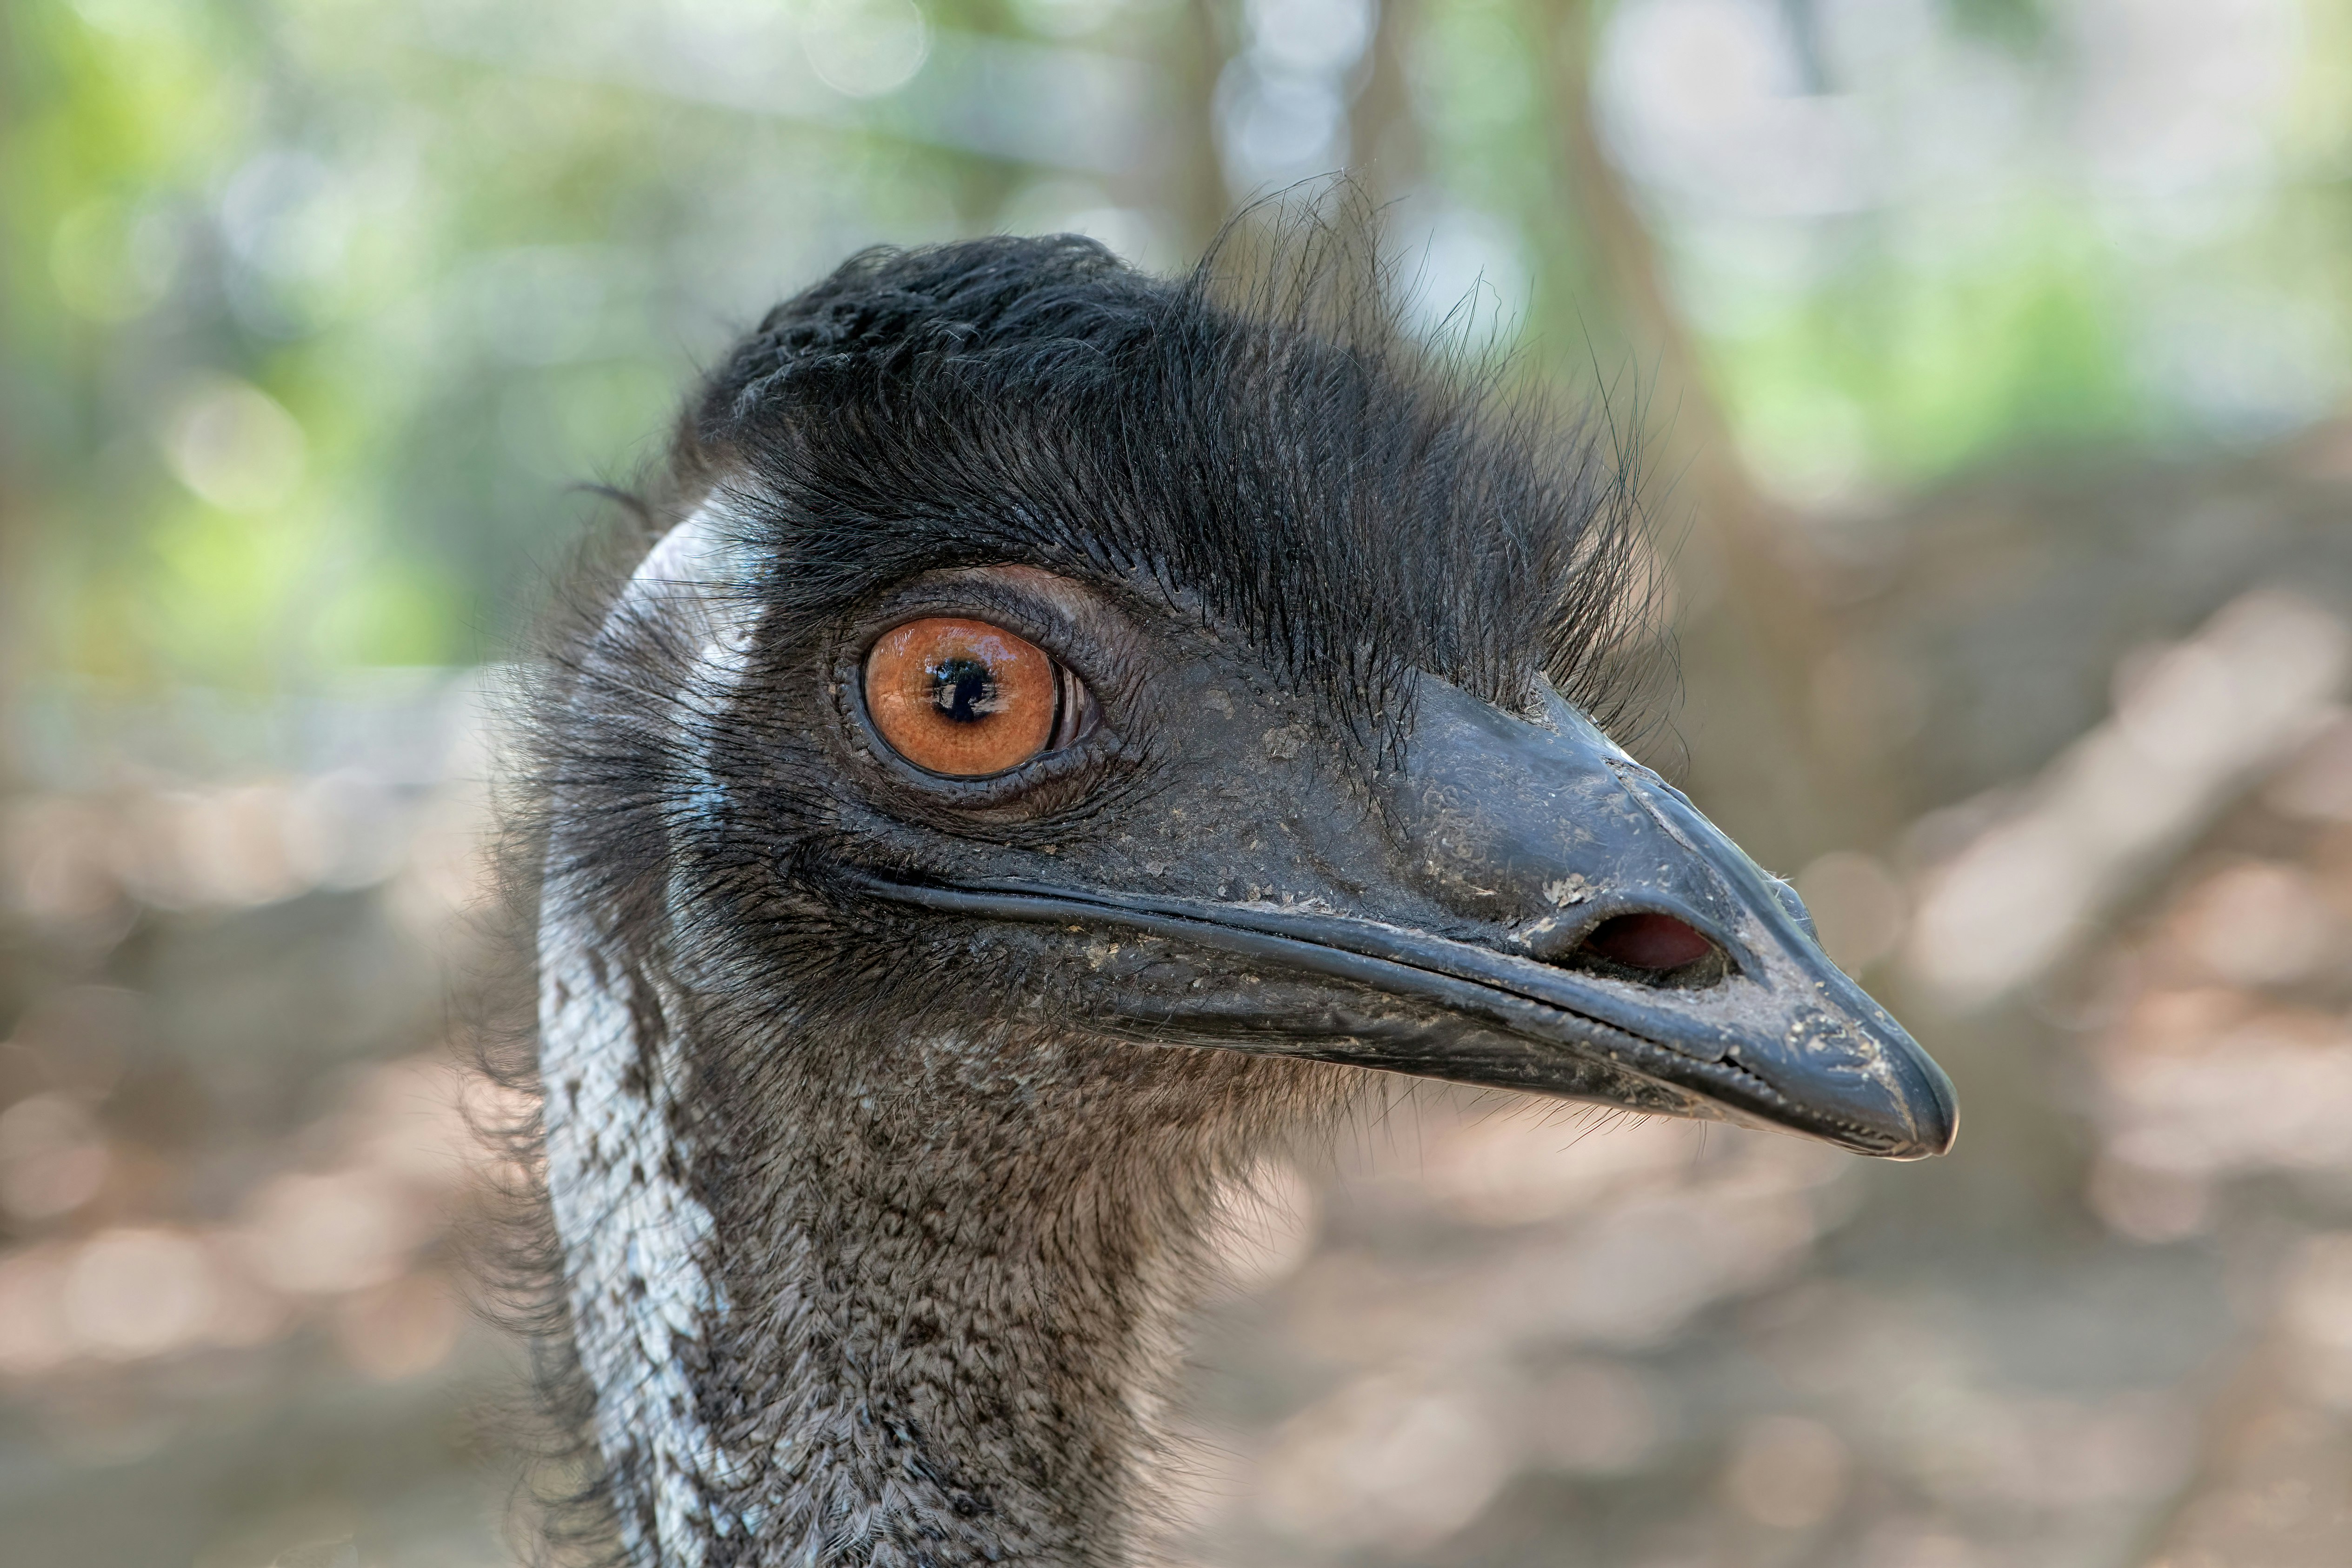 Eye-to-eye with an Australian emu. The second biggest type of bird in the world after the ostrich. 